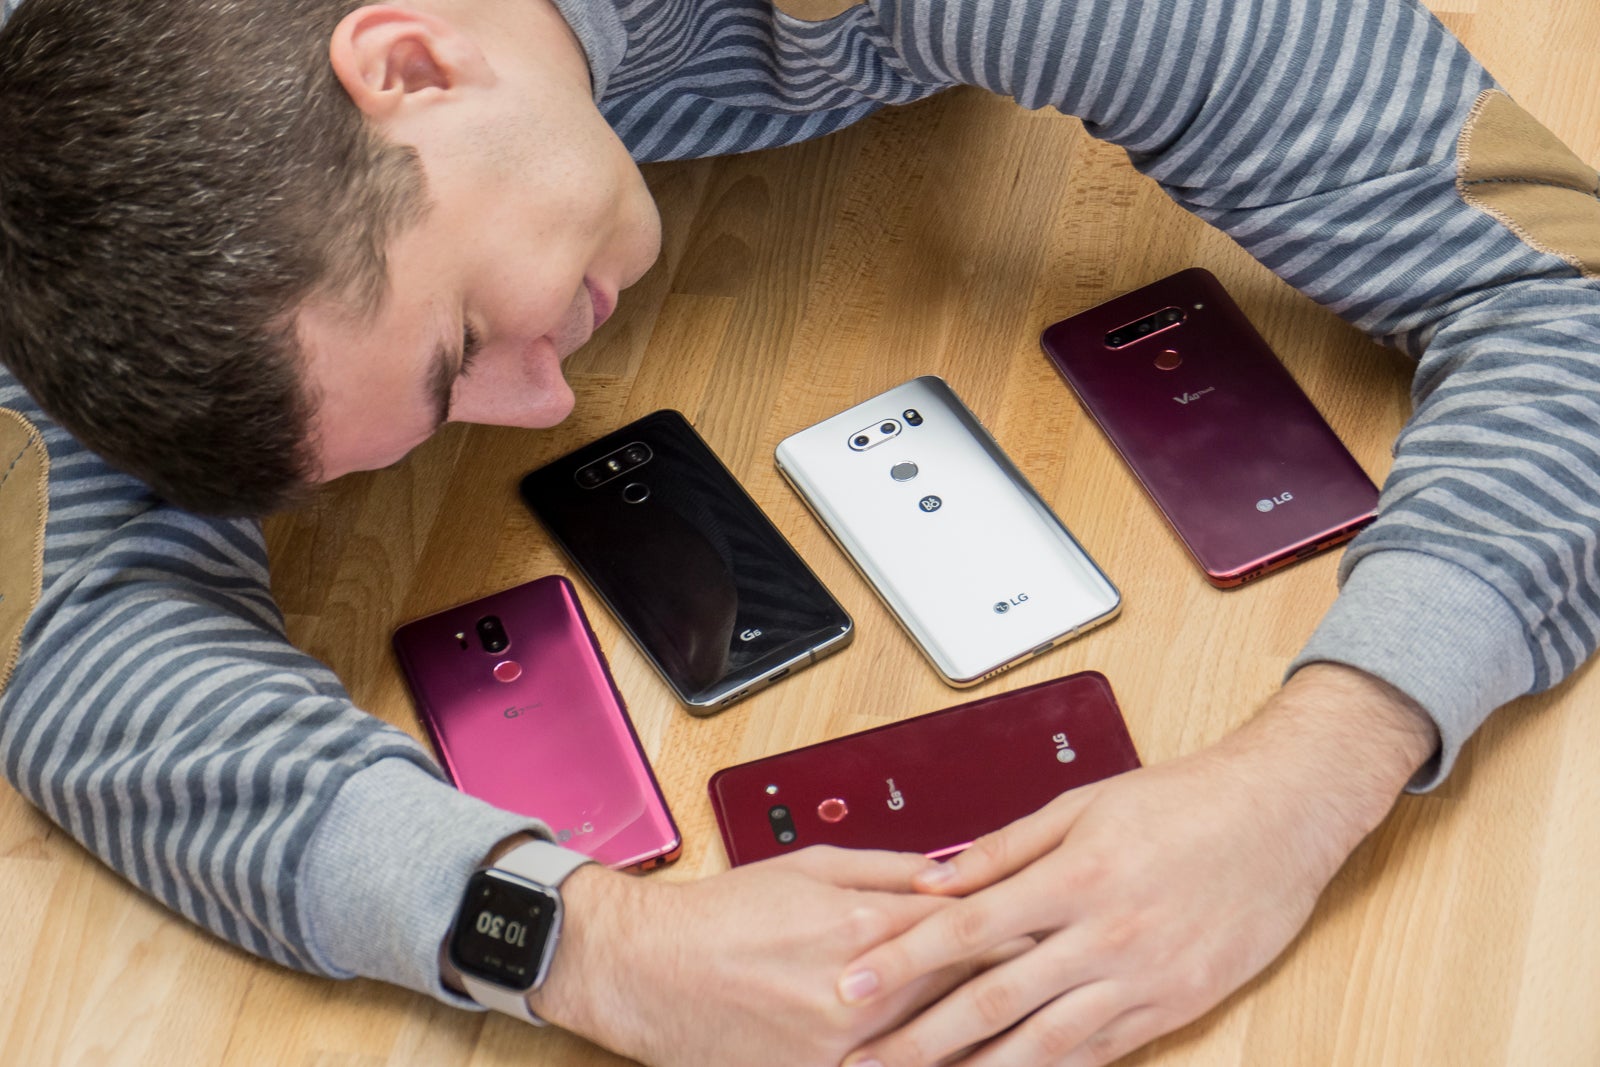 There must be at least one person that uses every LG flagship, right? - How often do you upgrade to a new phone?